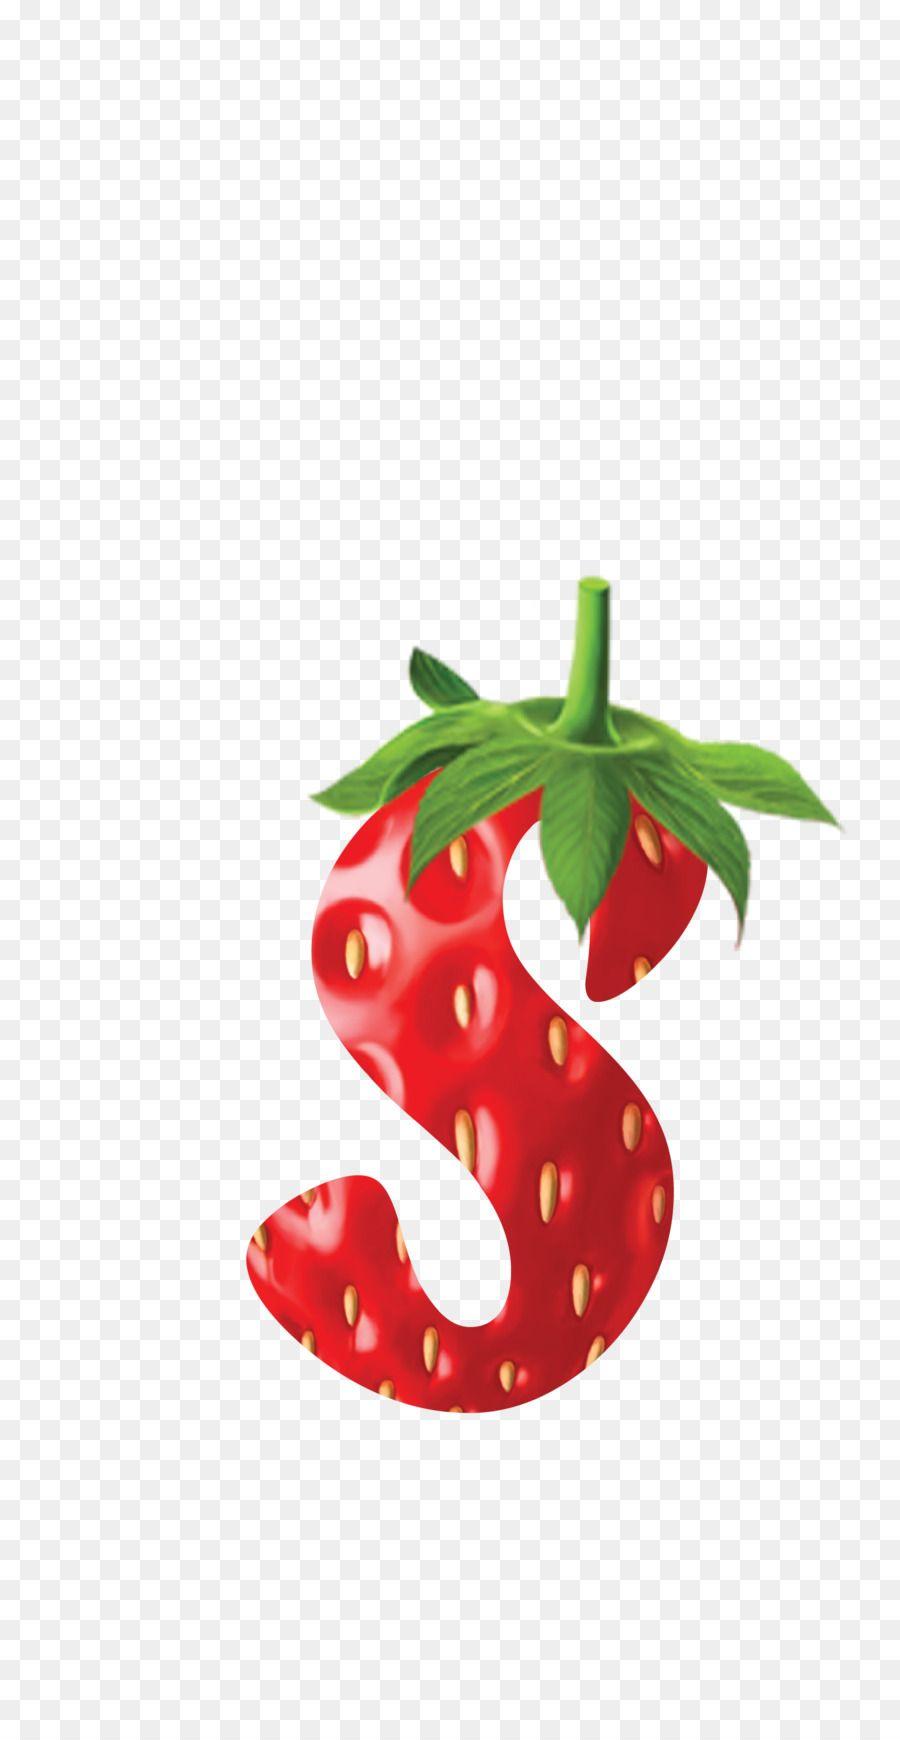 Strawberry Logo - Strawberry Christmas Ornament png download